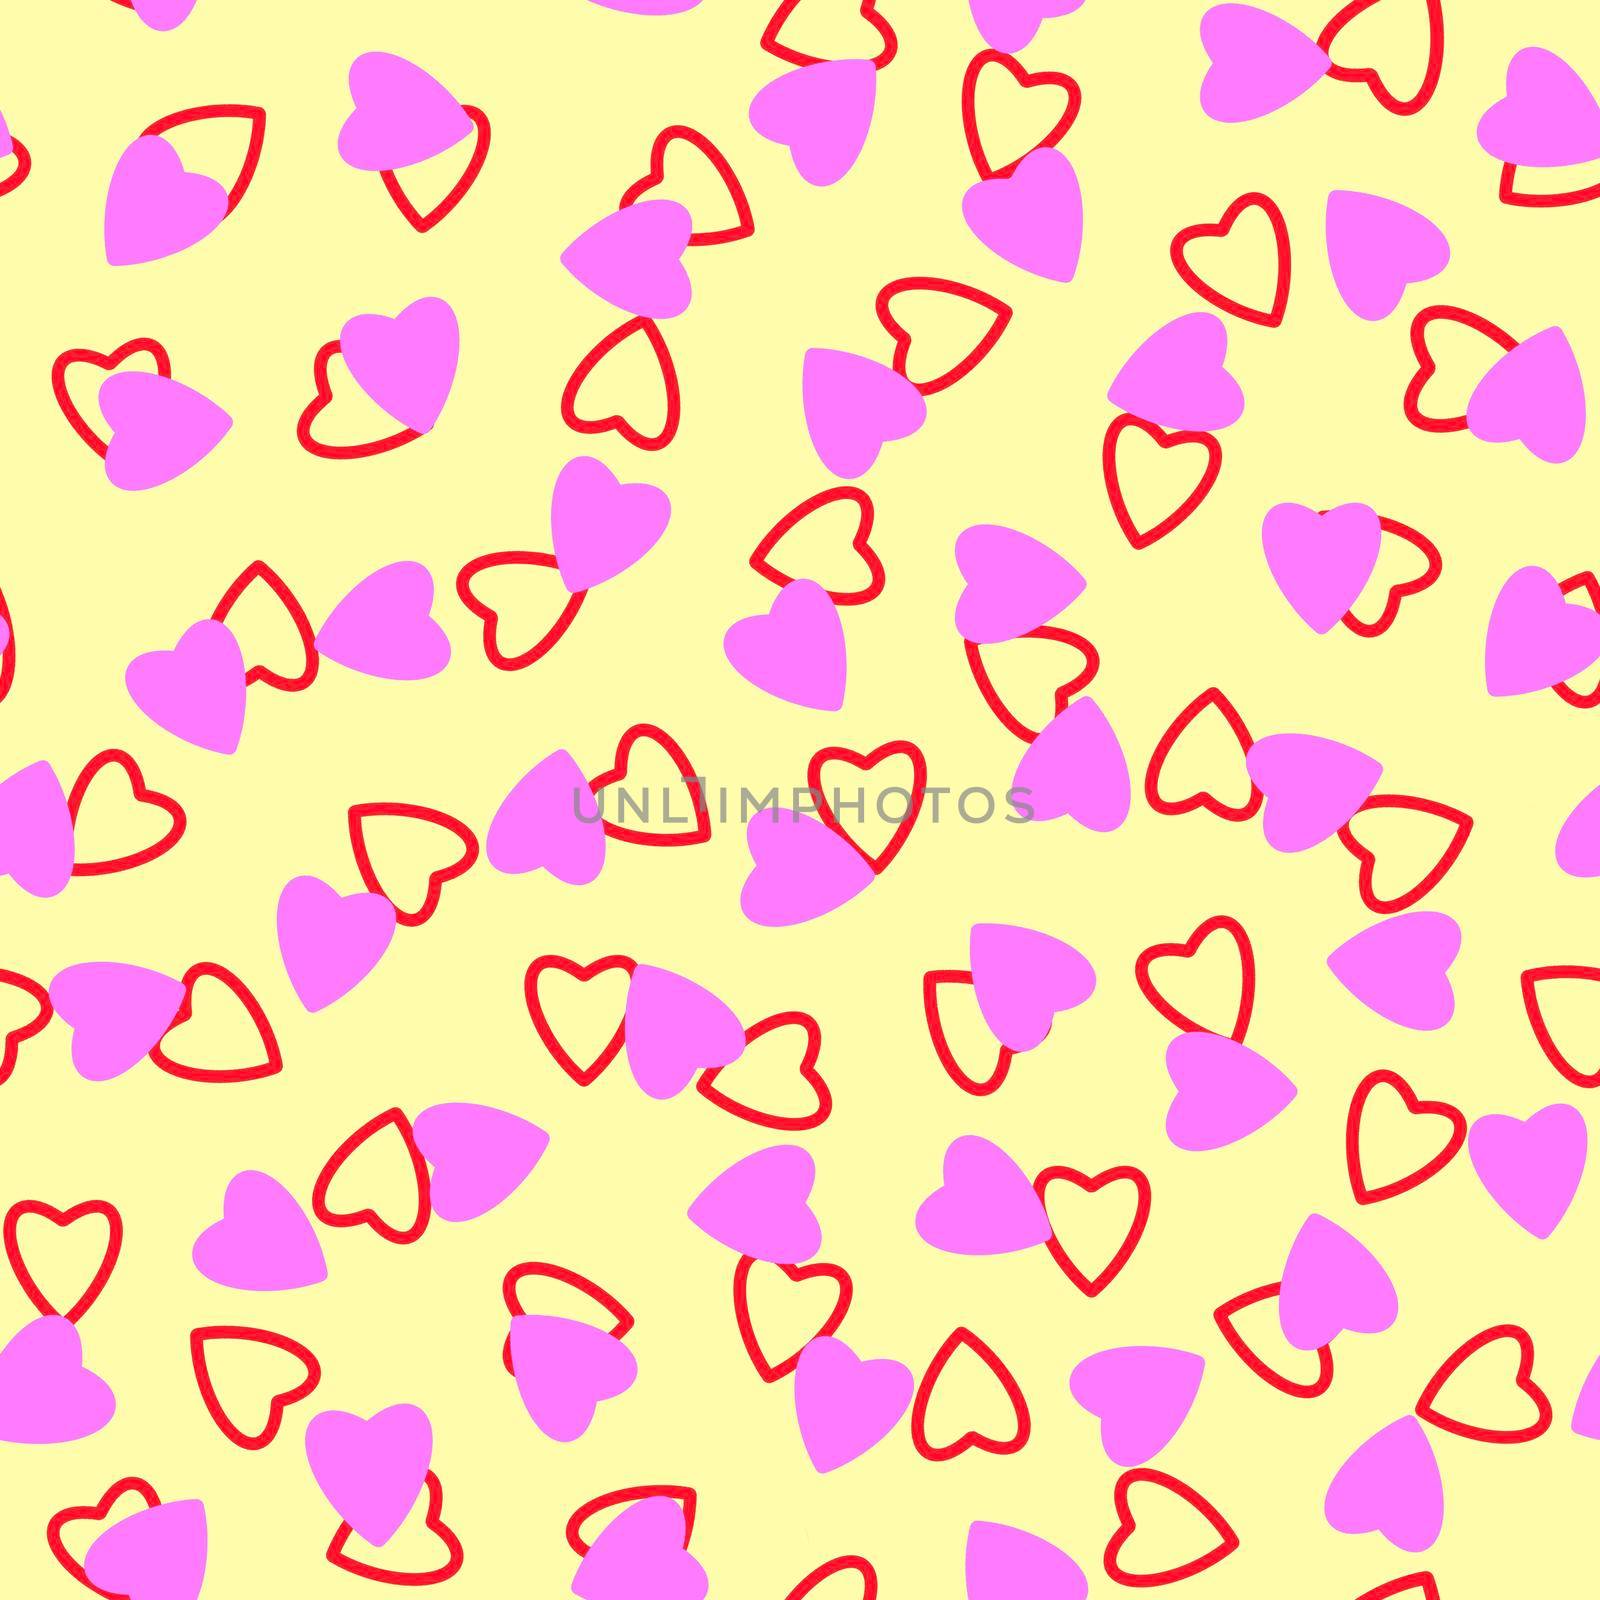 Simple hearts seamless pattern,endless chaotic texture made of tiny heart silhouettes.Valentines,mothers day background.Great for Easter,wedding,scrapbook,gift wrapping paper,textiles.Lilac,red,ivory by Angelsmoon